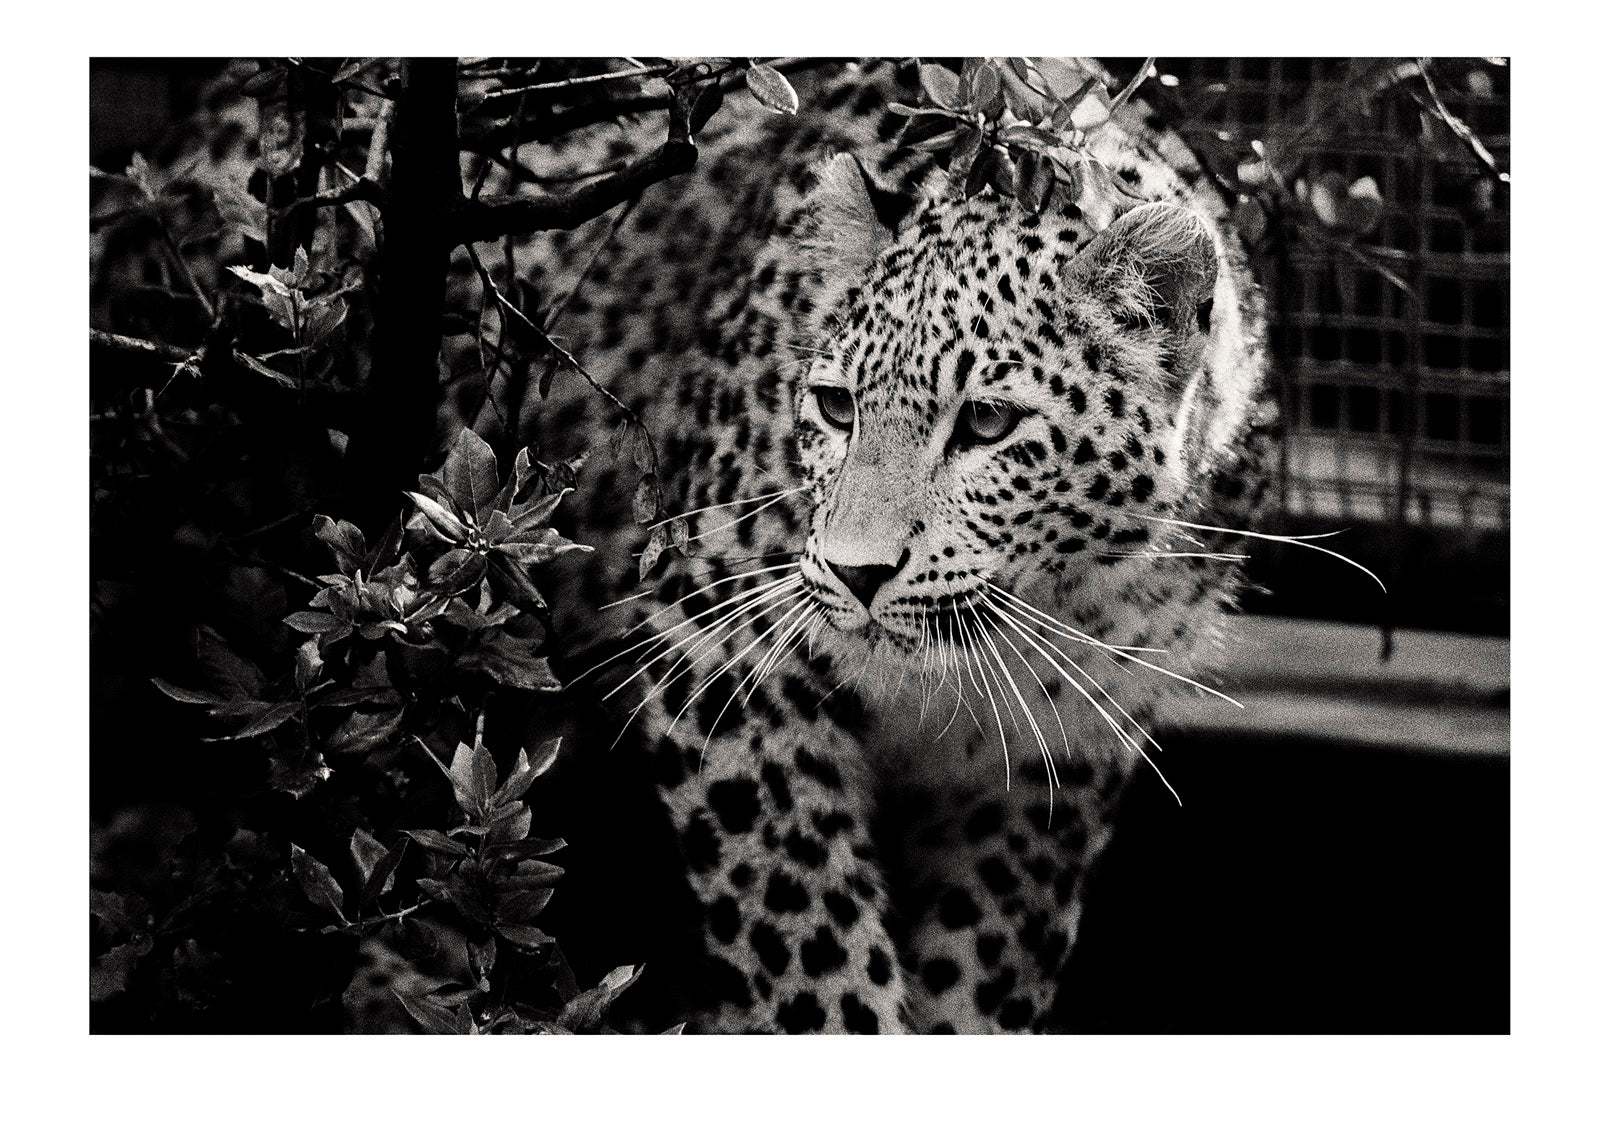 An endangered Persian Leopard sporting it's luxurious coat that has made it so popular to poachers.  Captured on Ilford HP5 black and white negative film. Zoological Board of Victoria, Victoria, Australia.